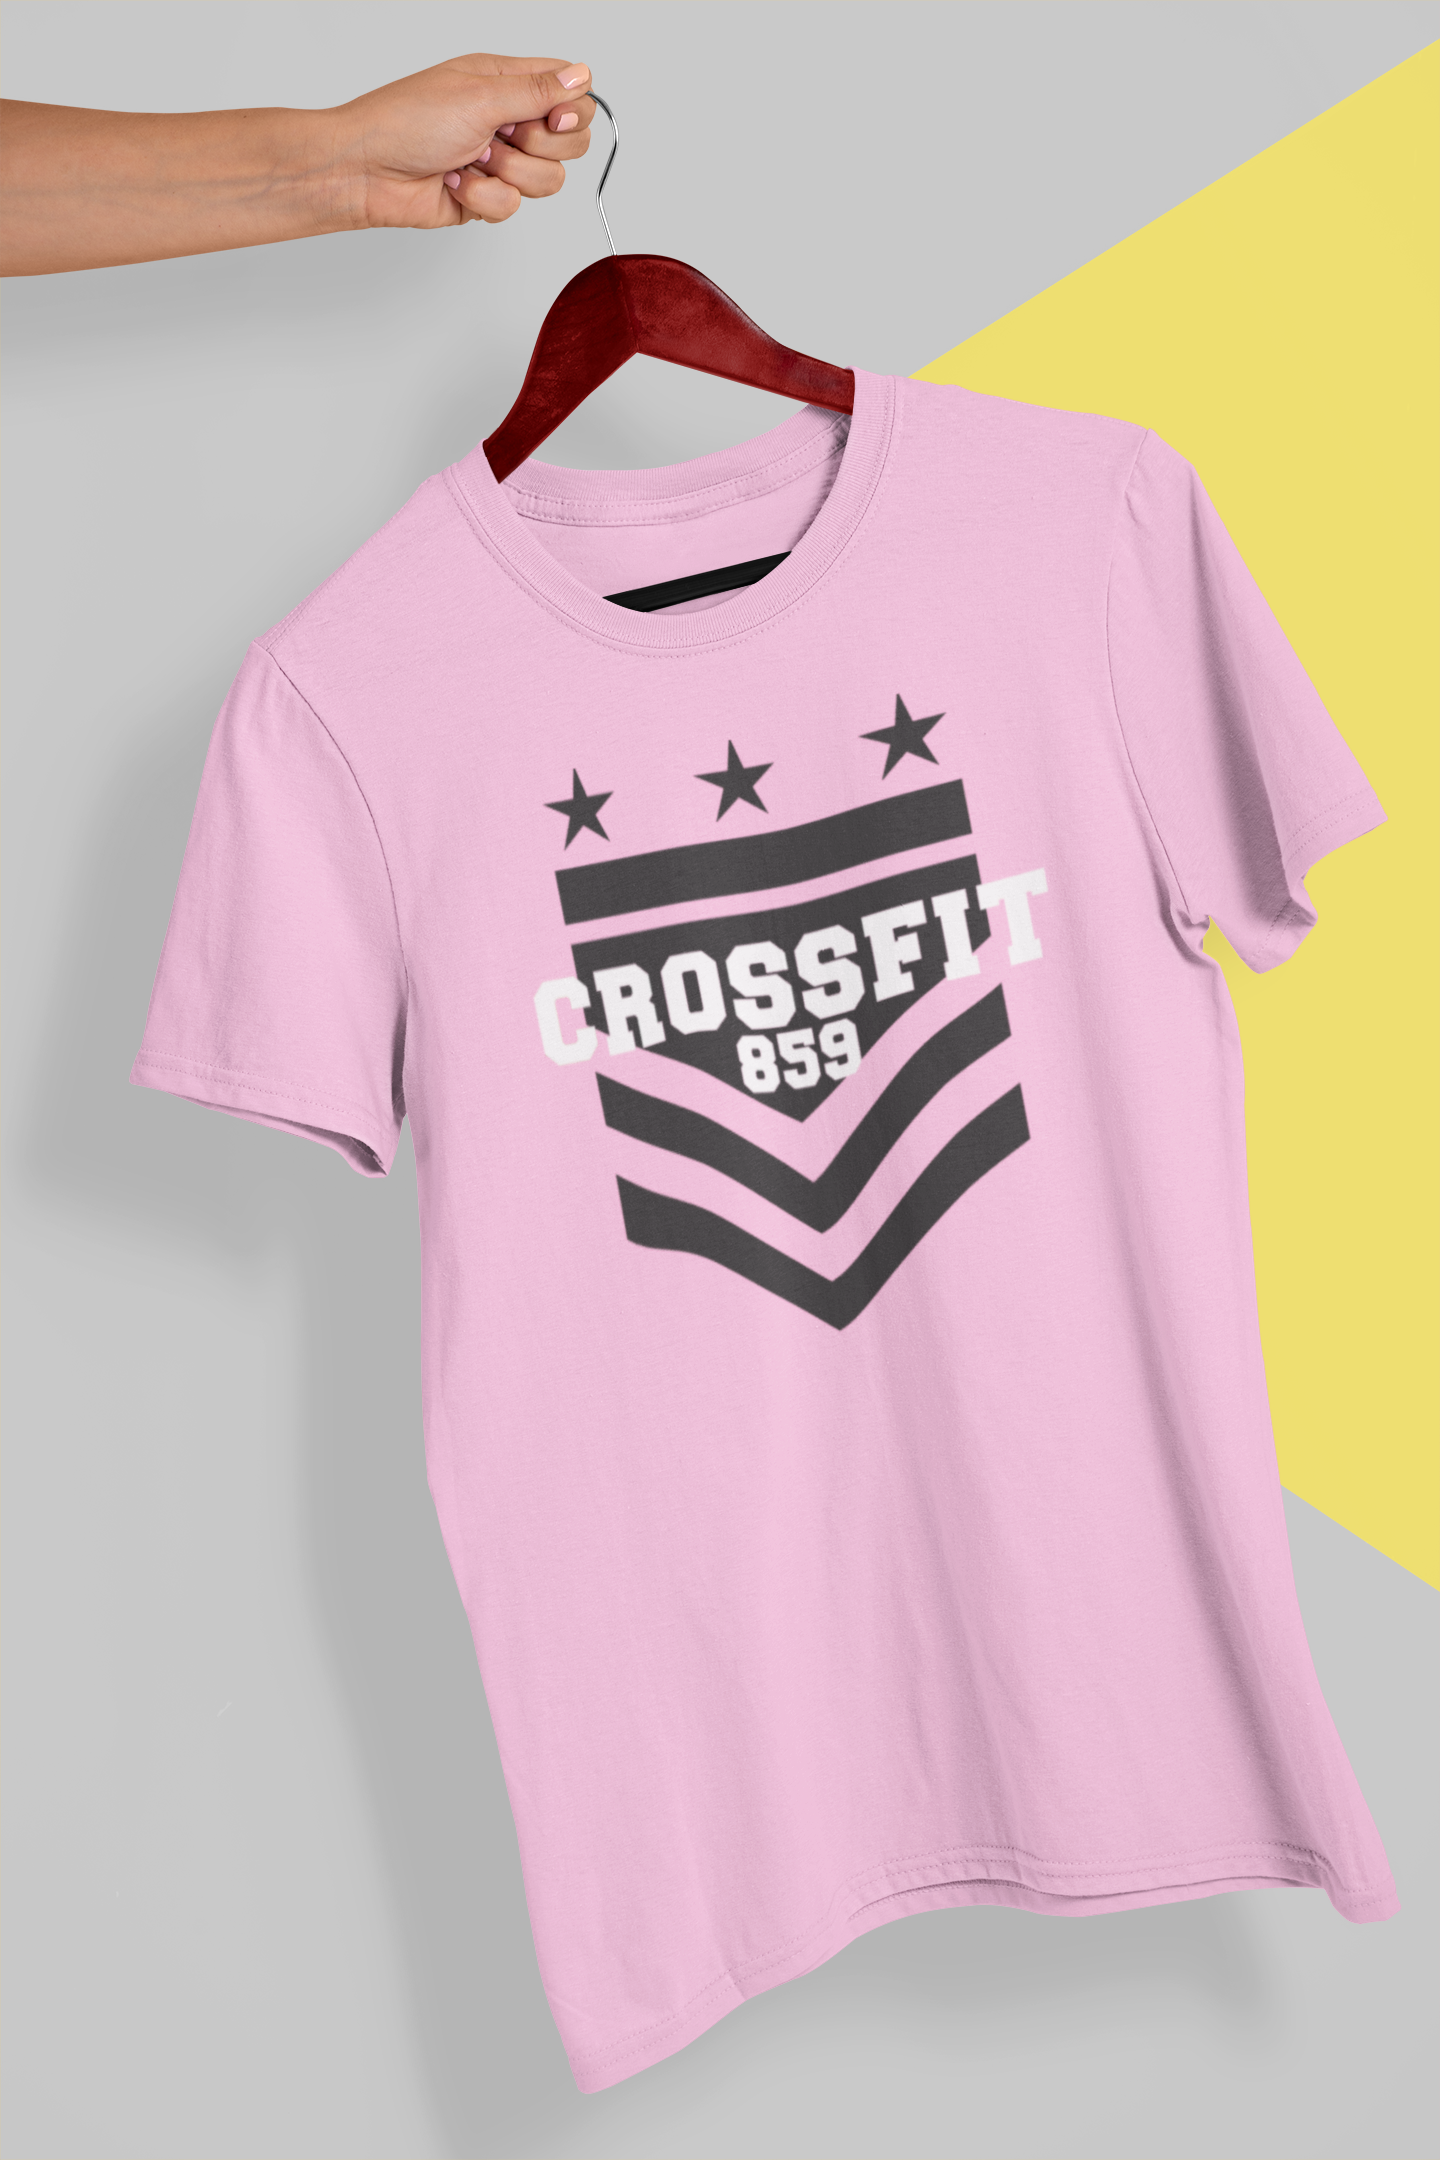 Rules of Crossfit T-Shirt - Funny Workout Gym Tee 100% Unisex Cotton Shirt